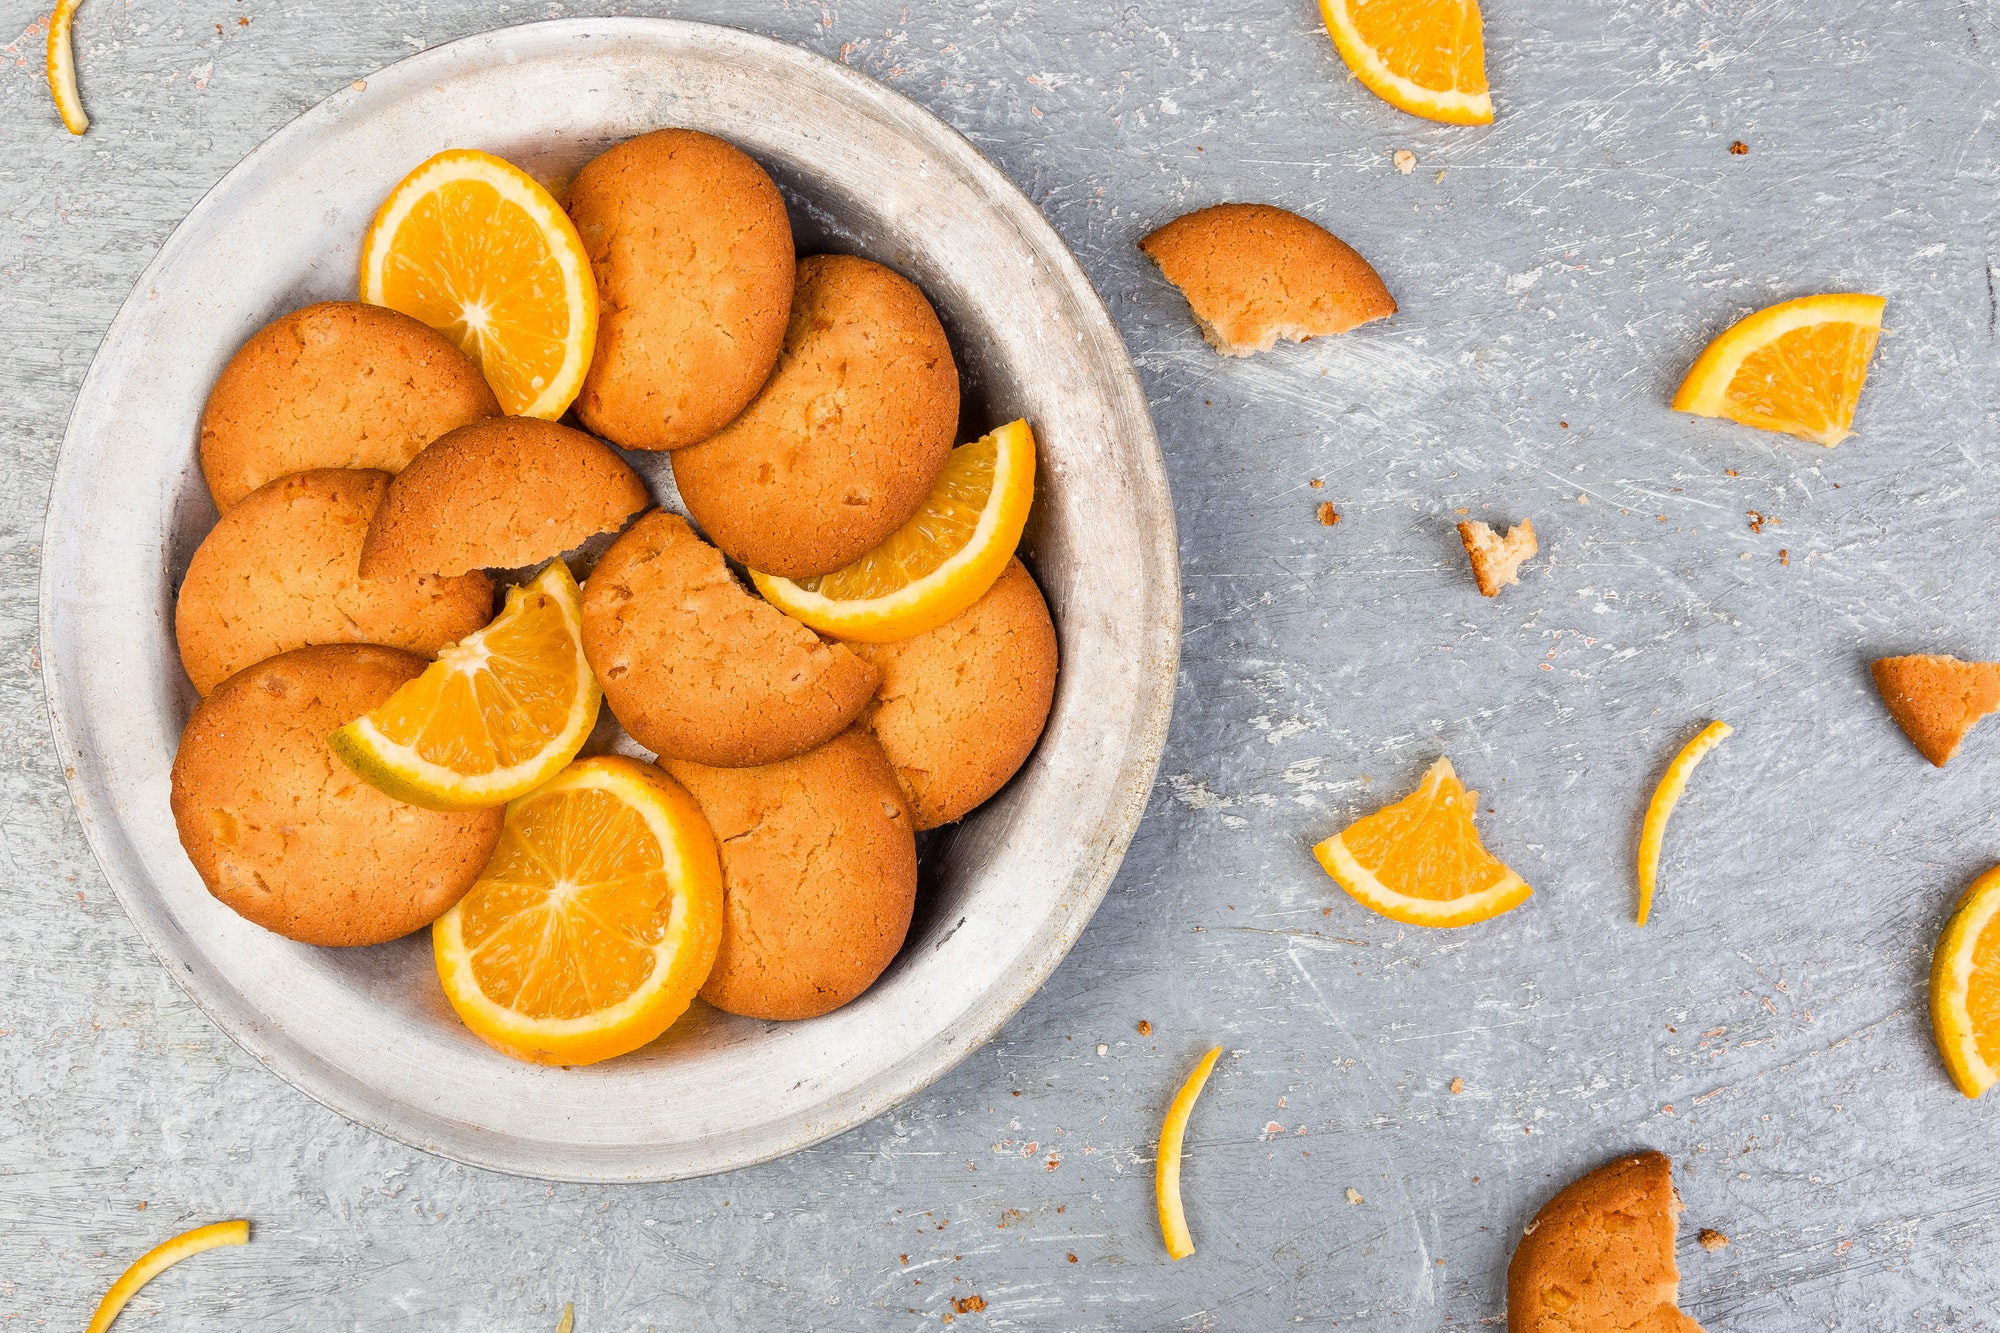 Cookies and orange citrus fruit on metal plate on grey background. Flat lay